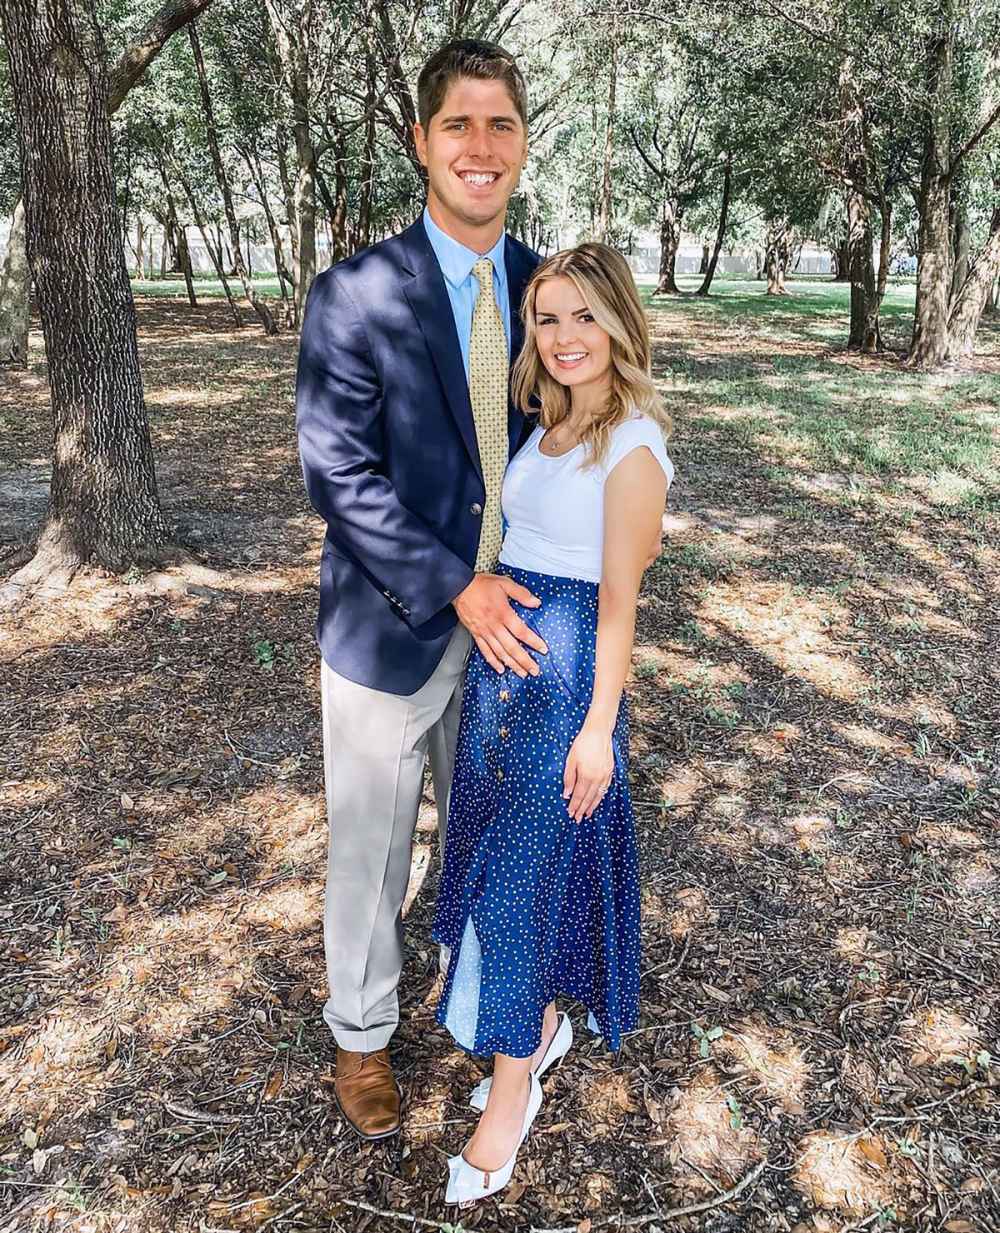 Bringing Up Bates’ Alyssa Bates and John Webster Welcome Their 4th Child